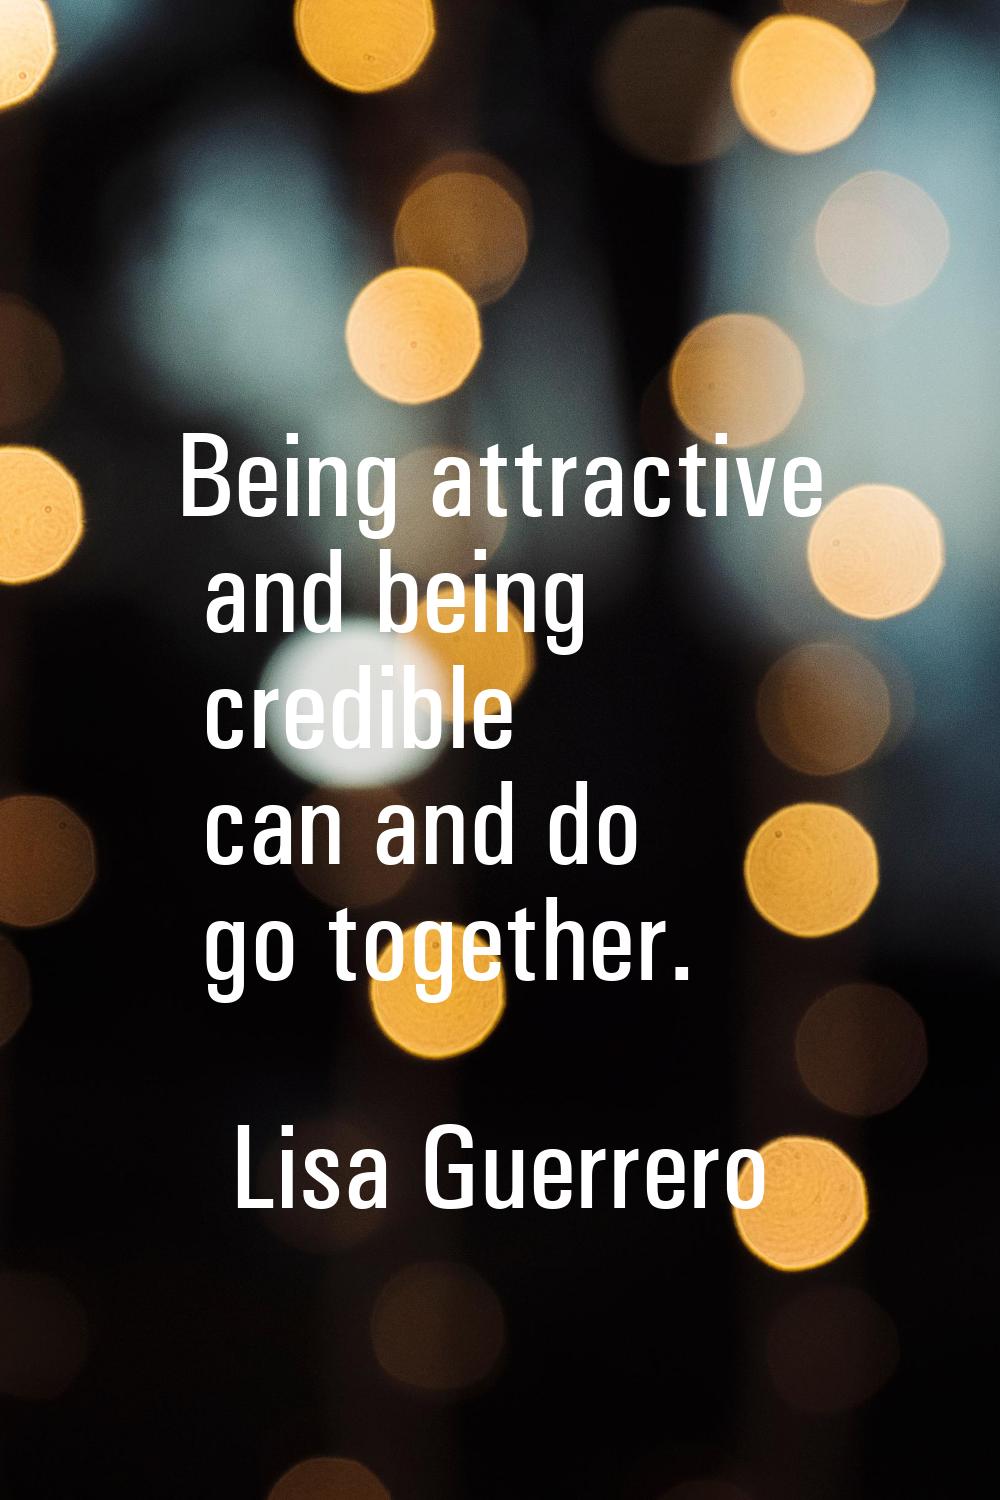 Being attractive and being credible can and do go together.